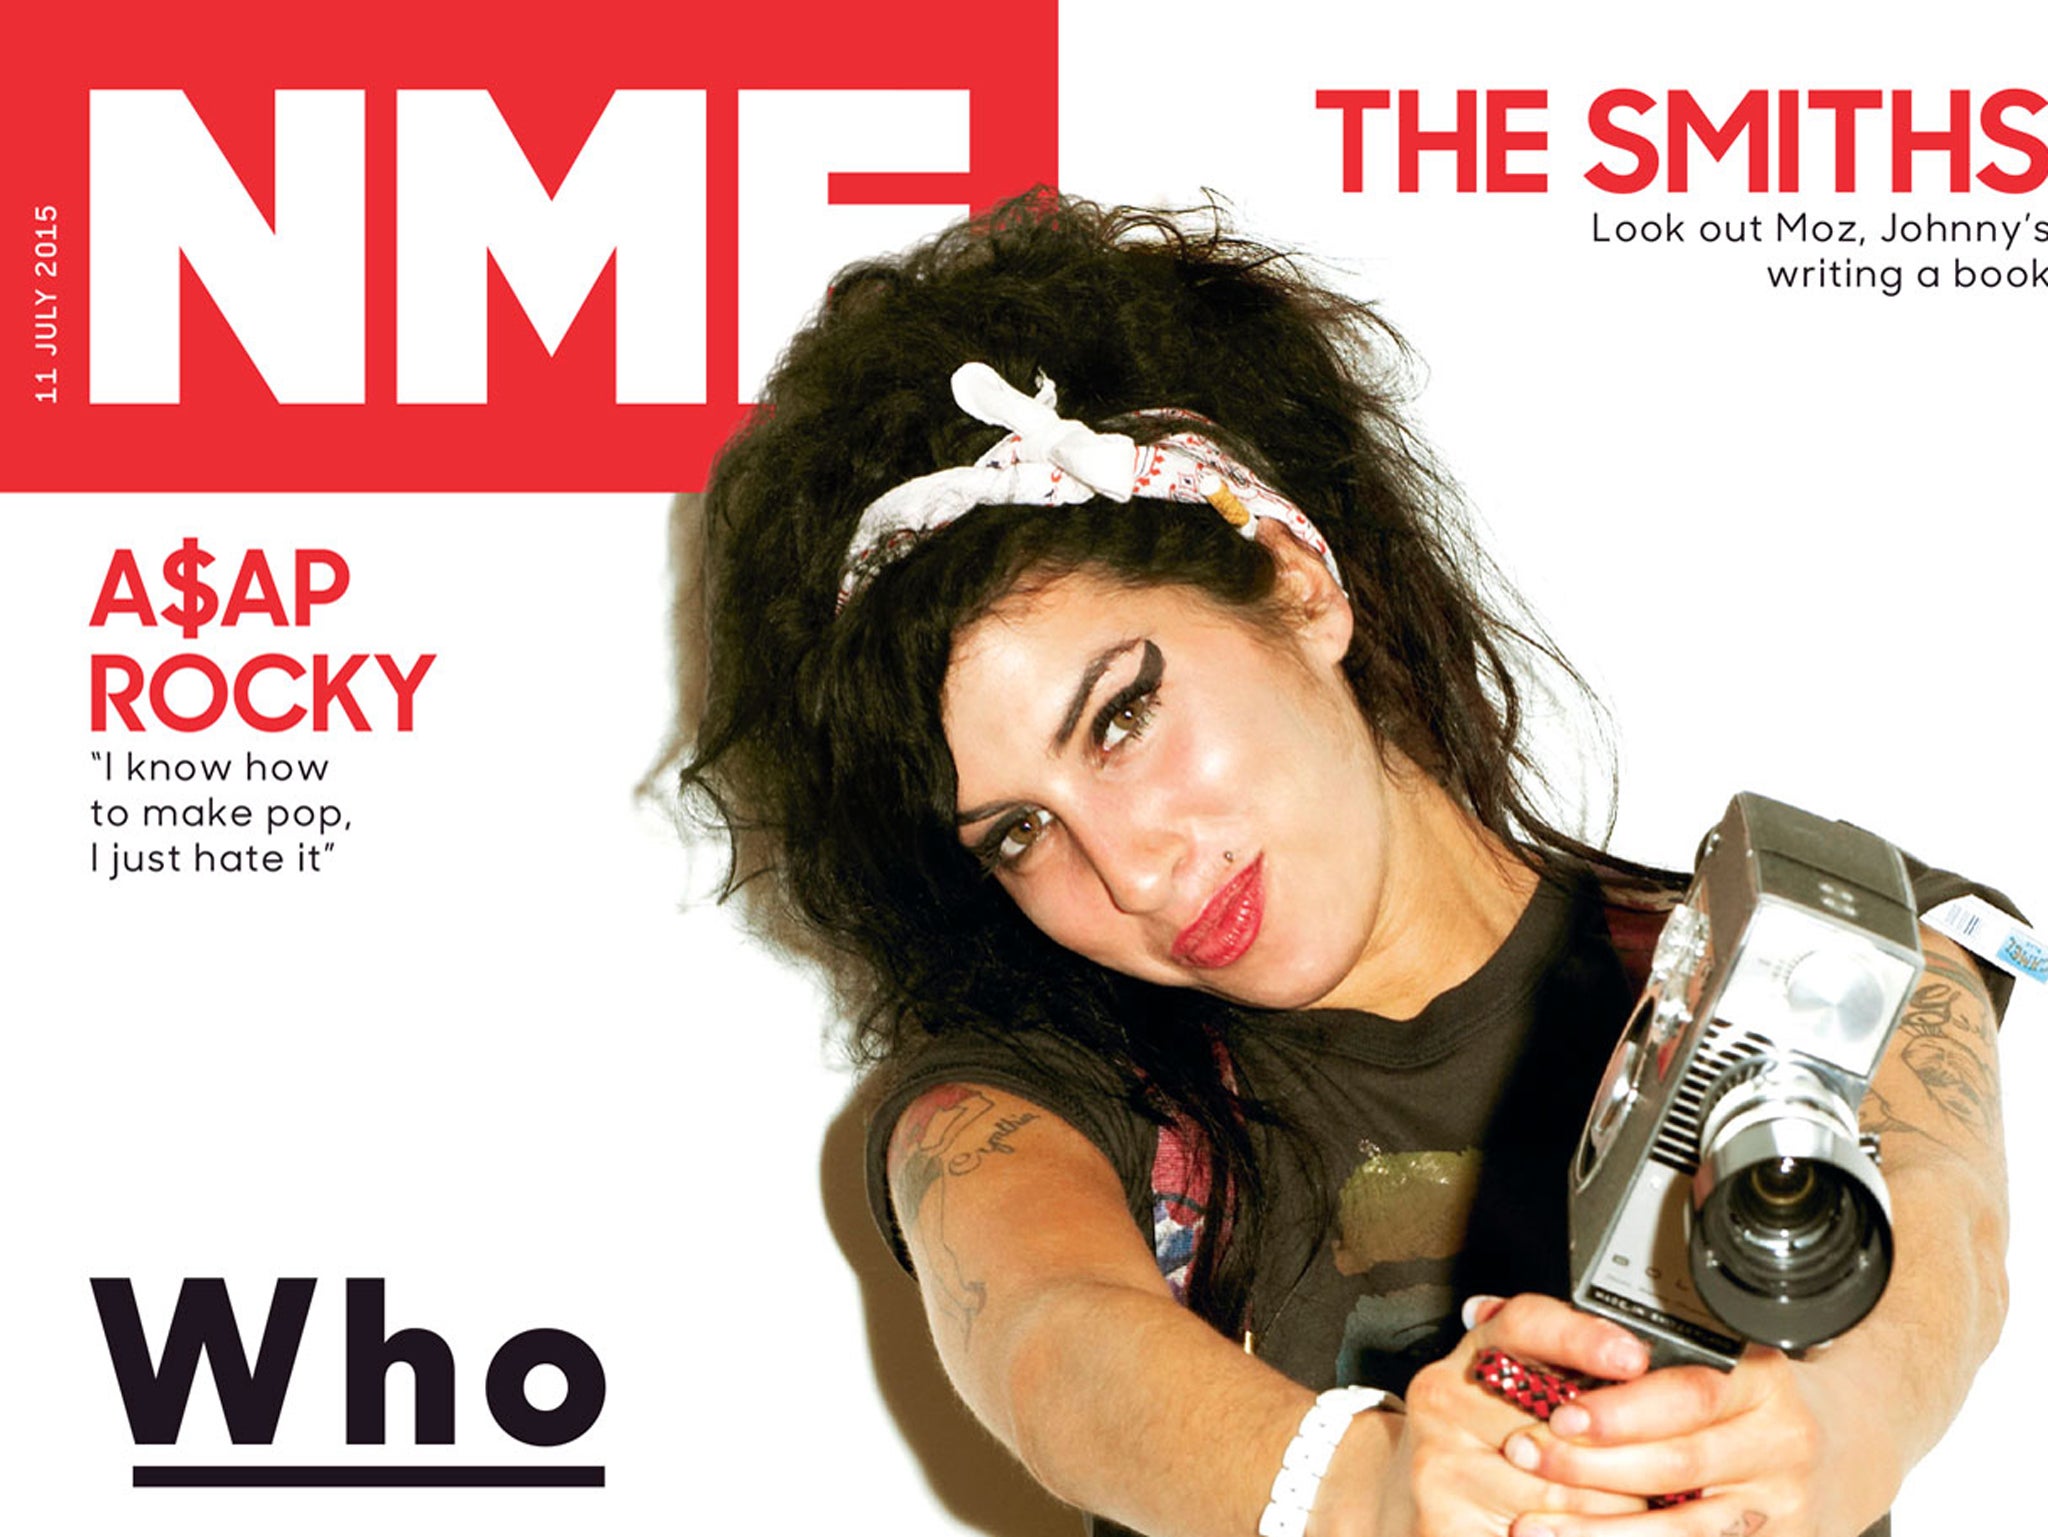 NME is following in the footsteps of Time Out and going free after 60 years